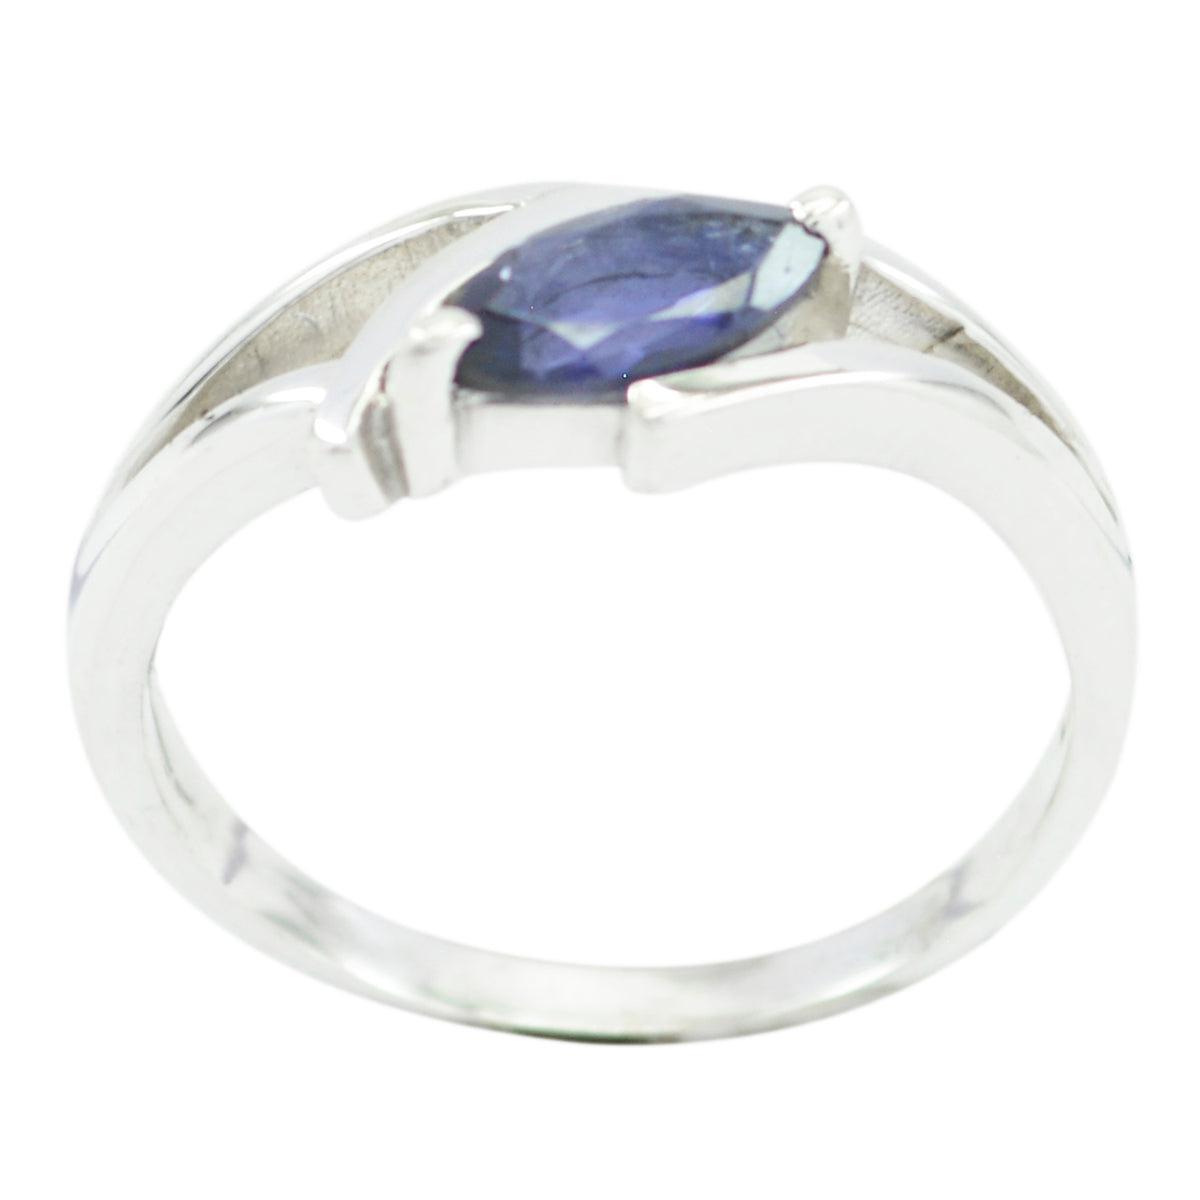 Riyo Comely Gemstone Iolite 925 Silver Rings Ornament & Accents